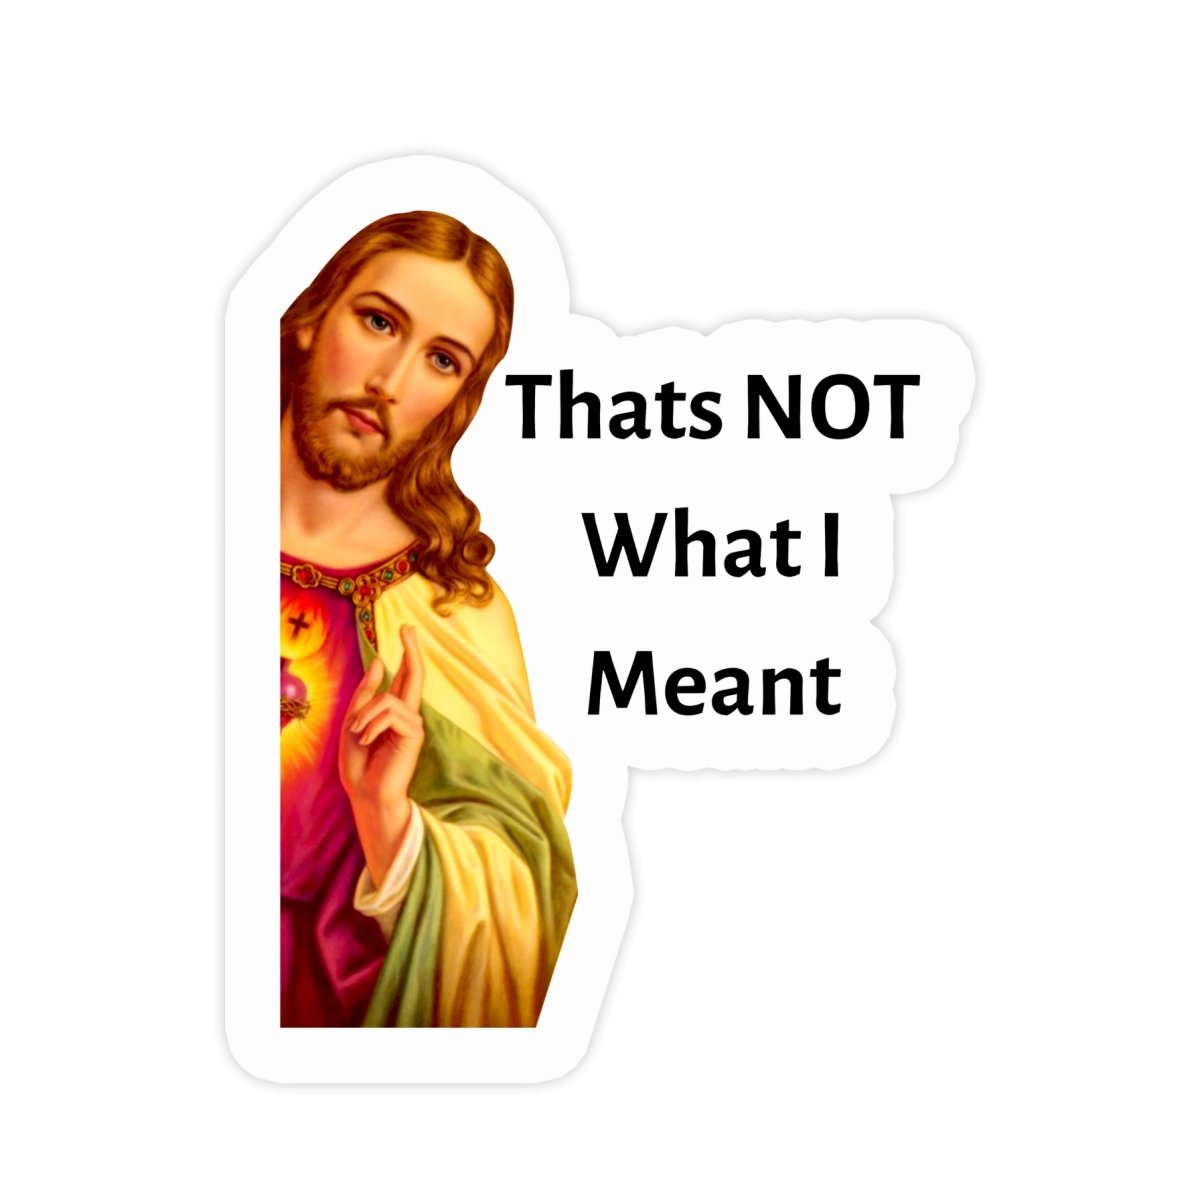 Jesus "Thats Not What I Meant" Sticker - stickerbullJesus "Thats Not What I Meant" StickerRetail StickerstickerbullstickerbullNotWhatIMeant_Jesus "Thats Not What I Meant" Sticker